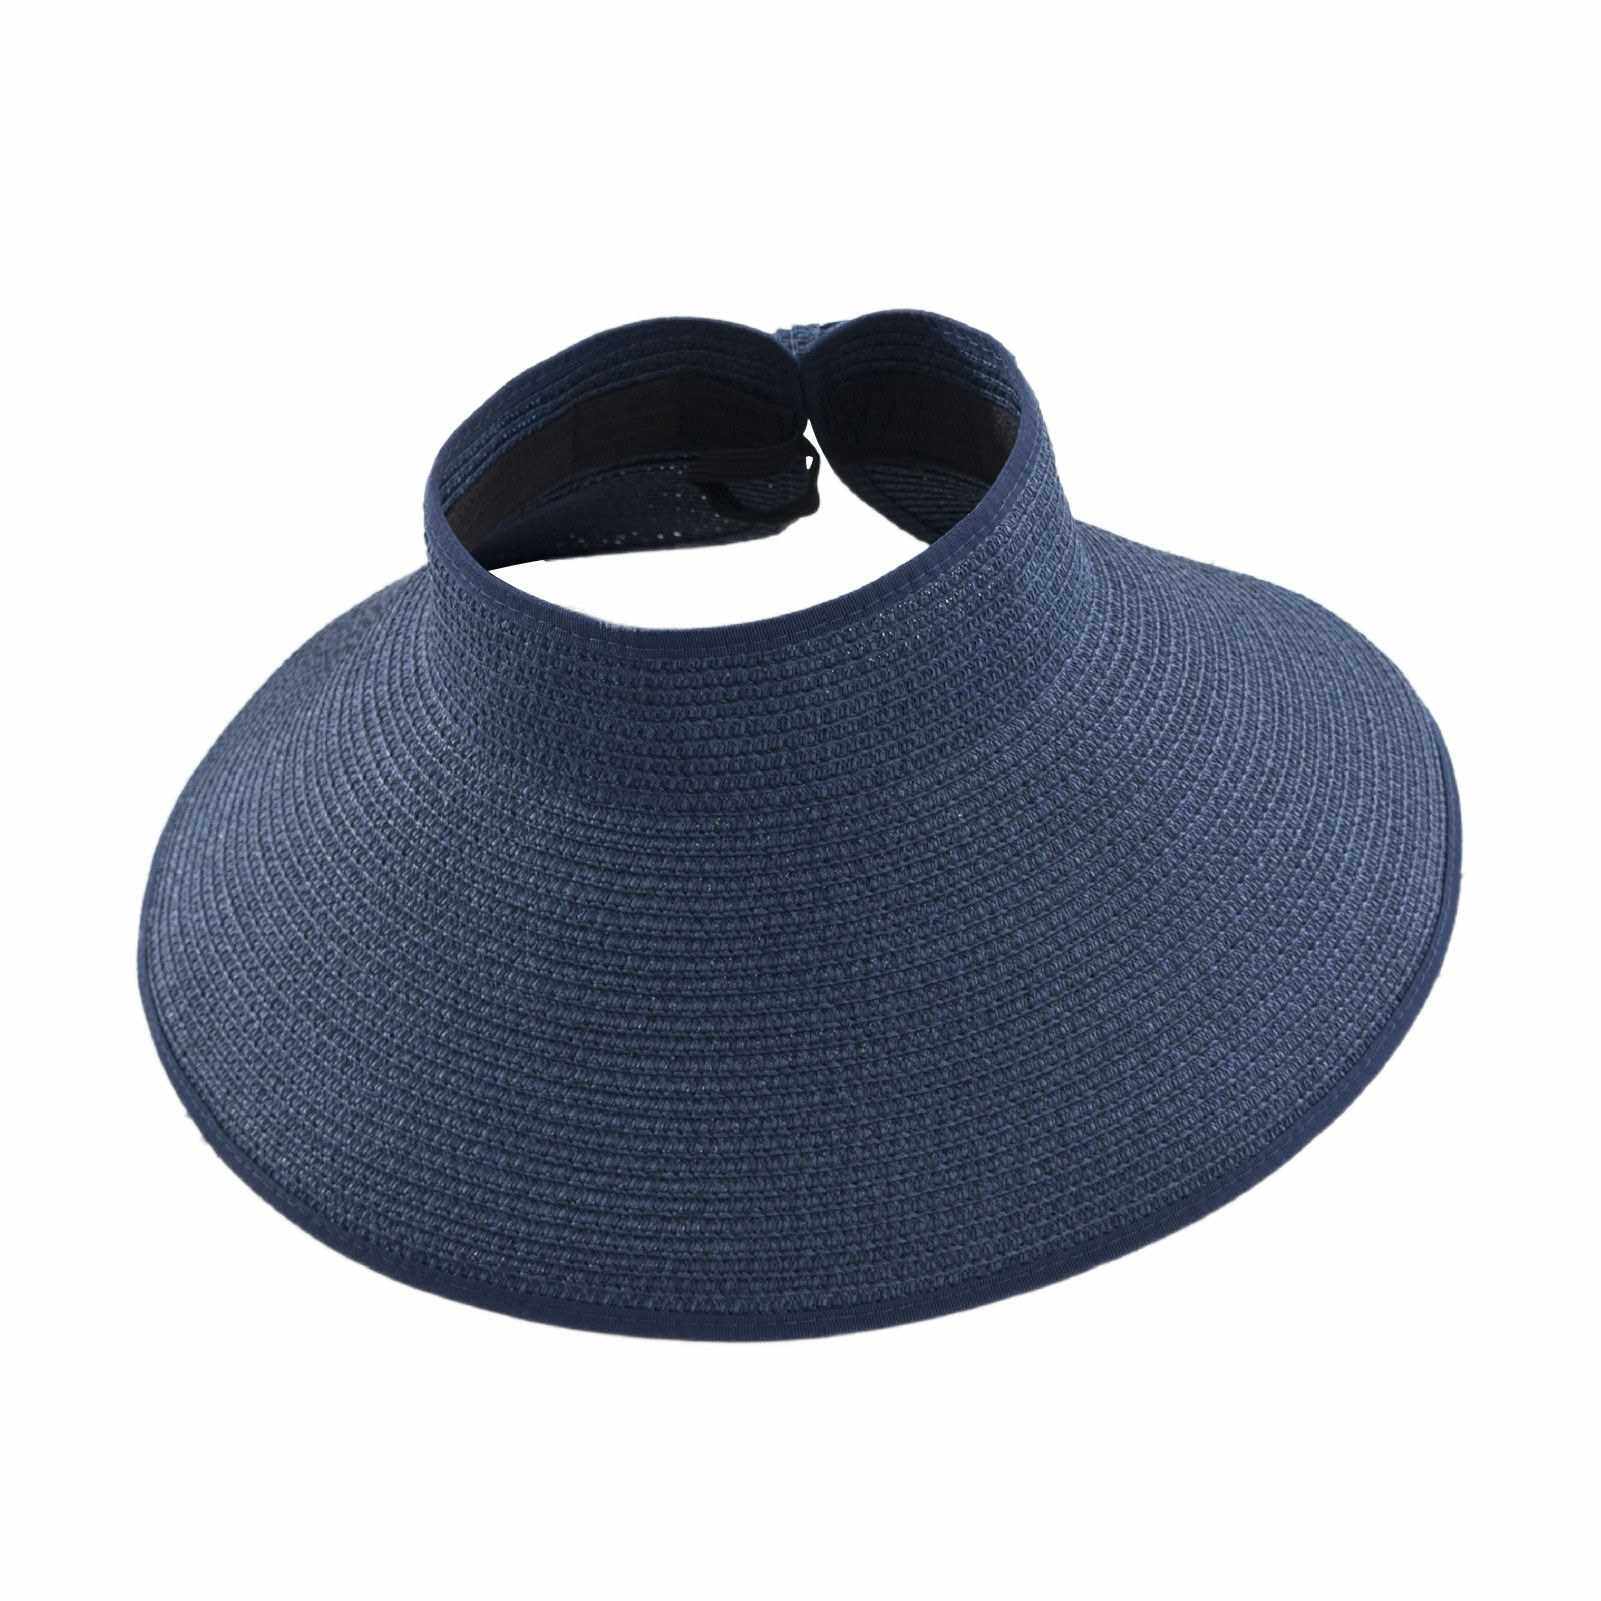 BEST SELLER Women Sun Hat Wide Brim Packable Adjustable Roll-up Straw Visor with Bowknot Beach Cap for Hiking Camping (Dark Blue)